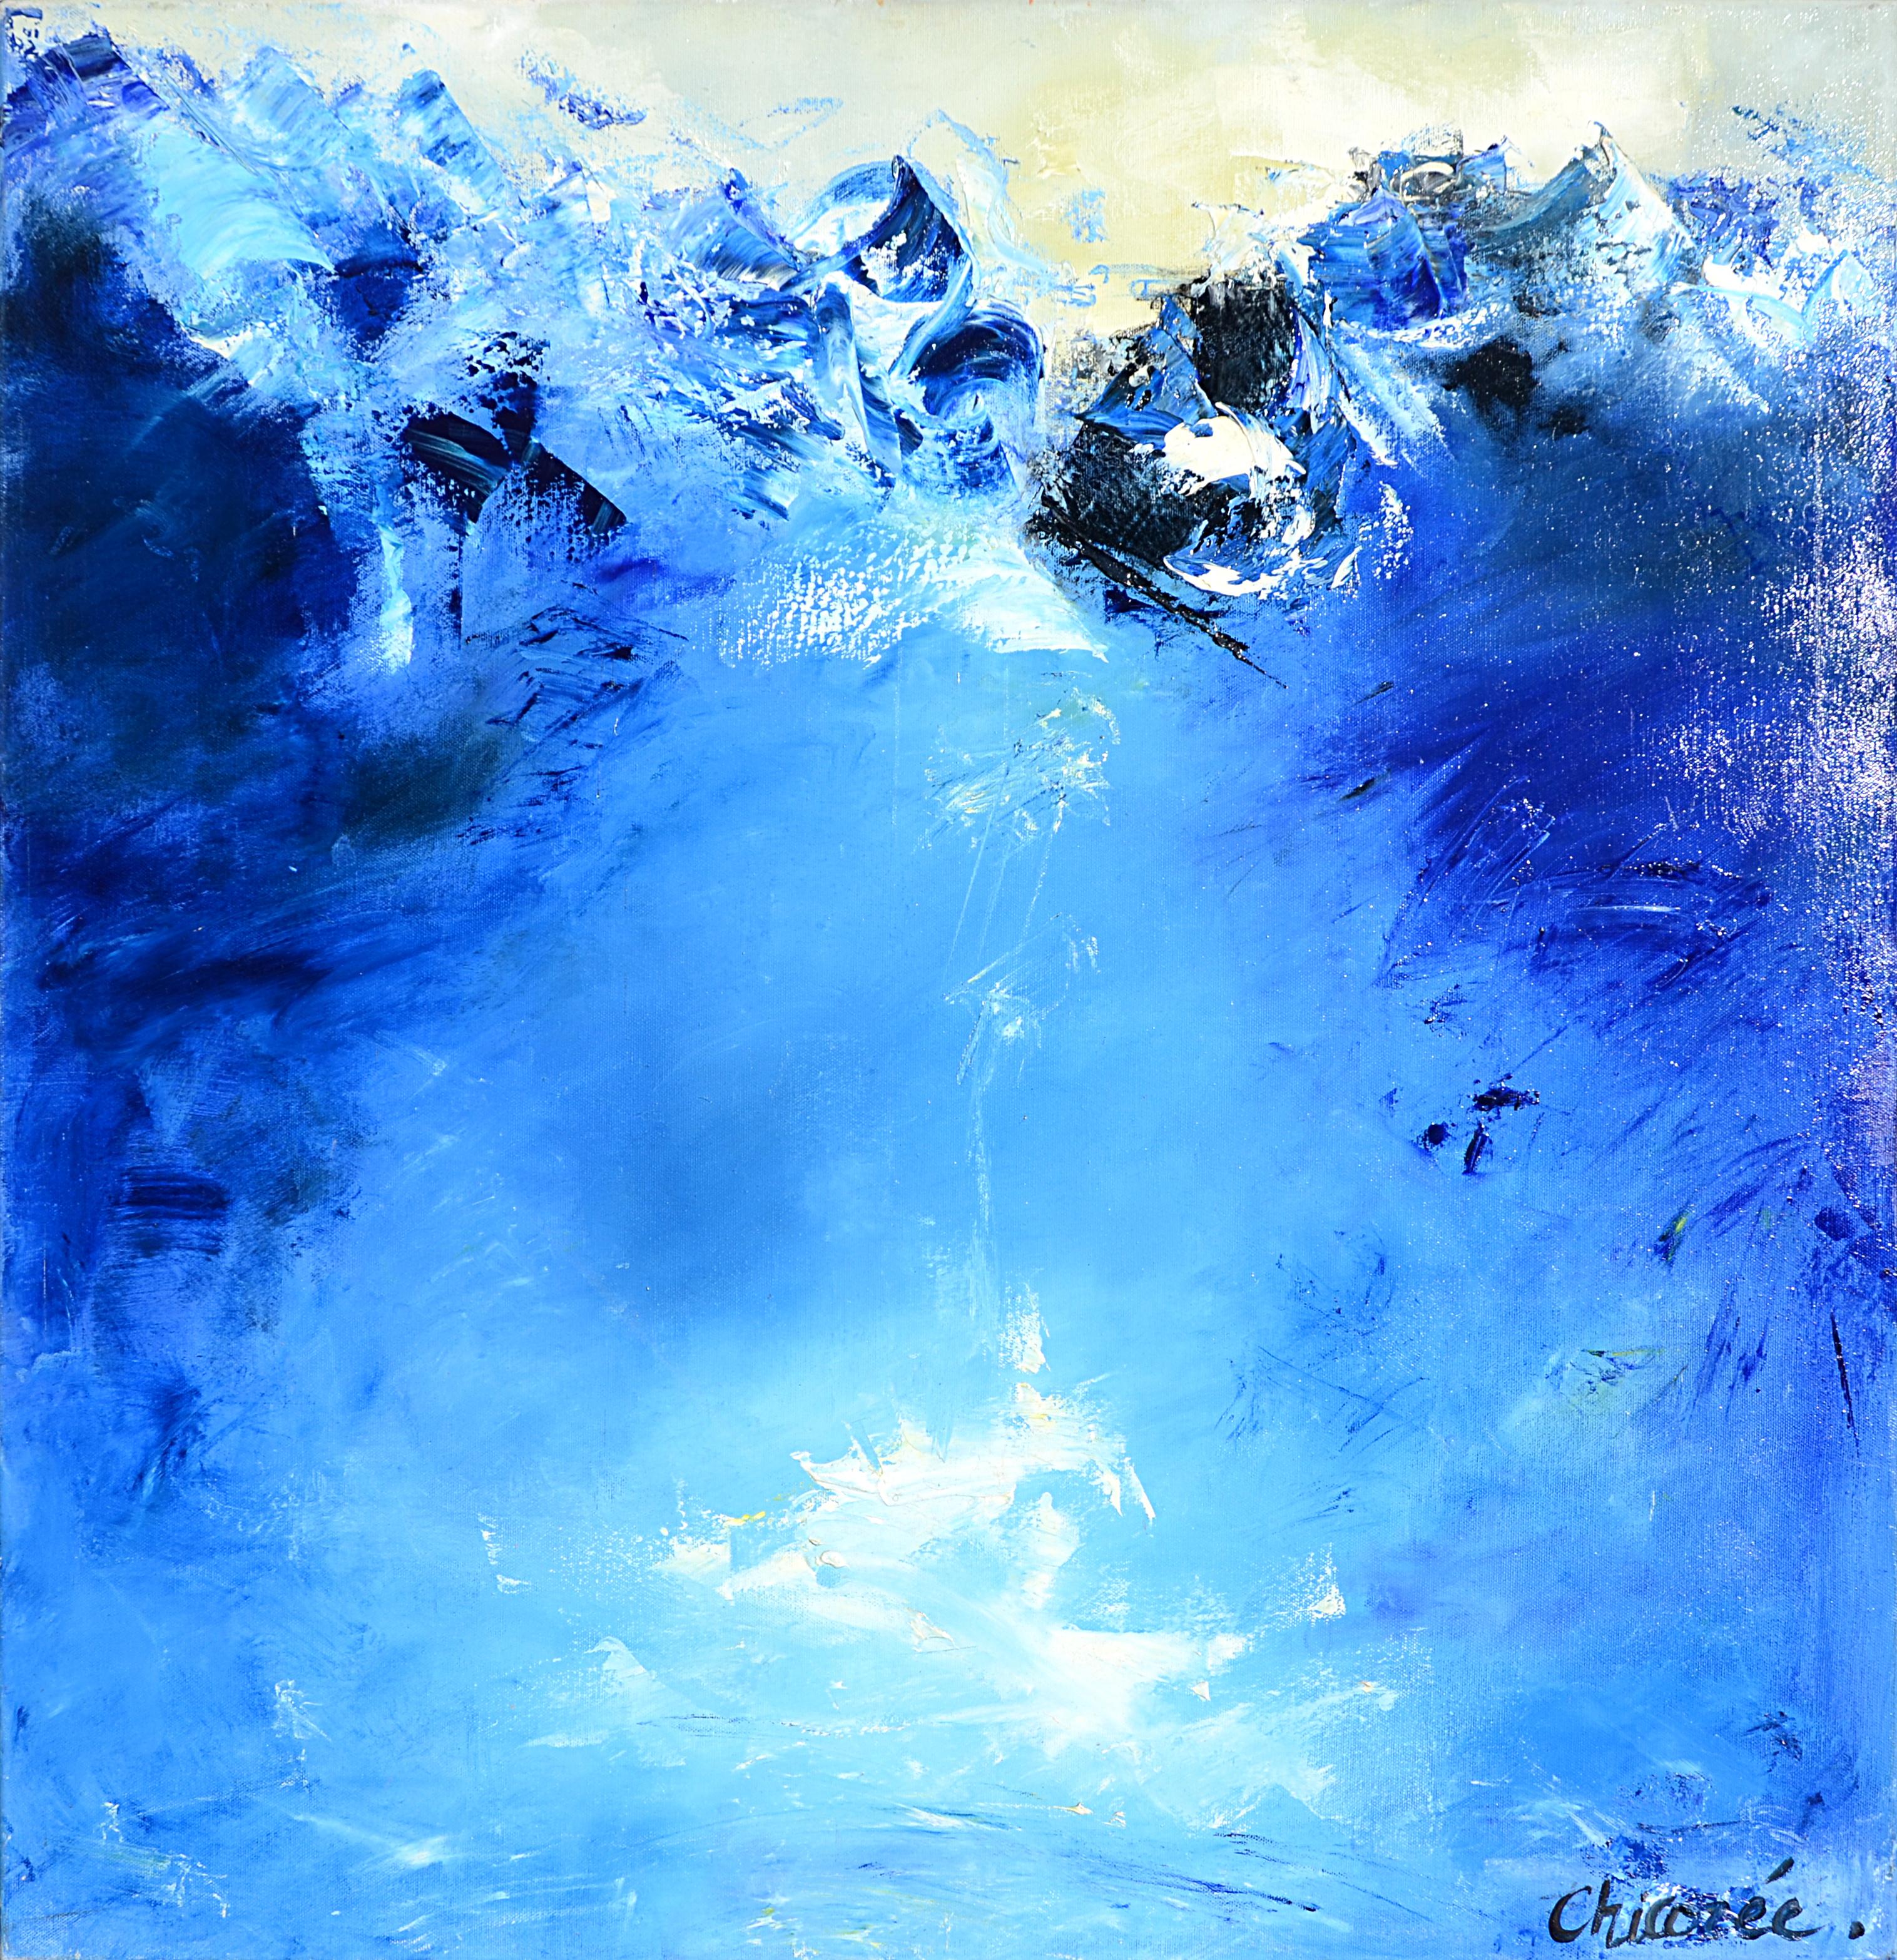 Chicorée Abstract Painting - "L'eau d'as", Blue Abstract Squared Oil Painting